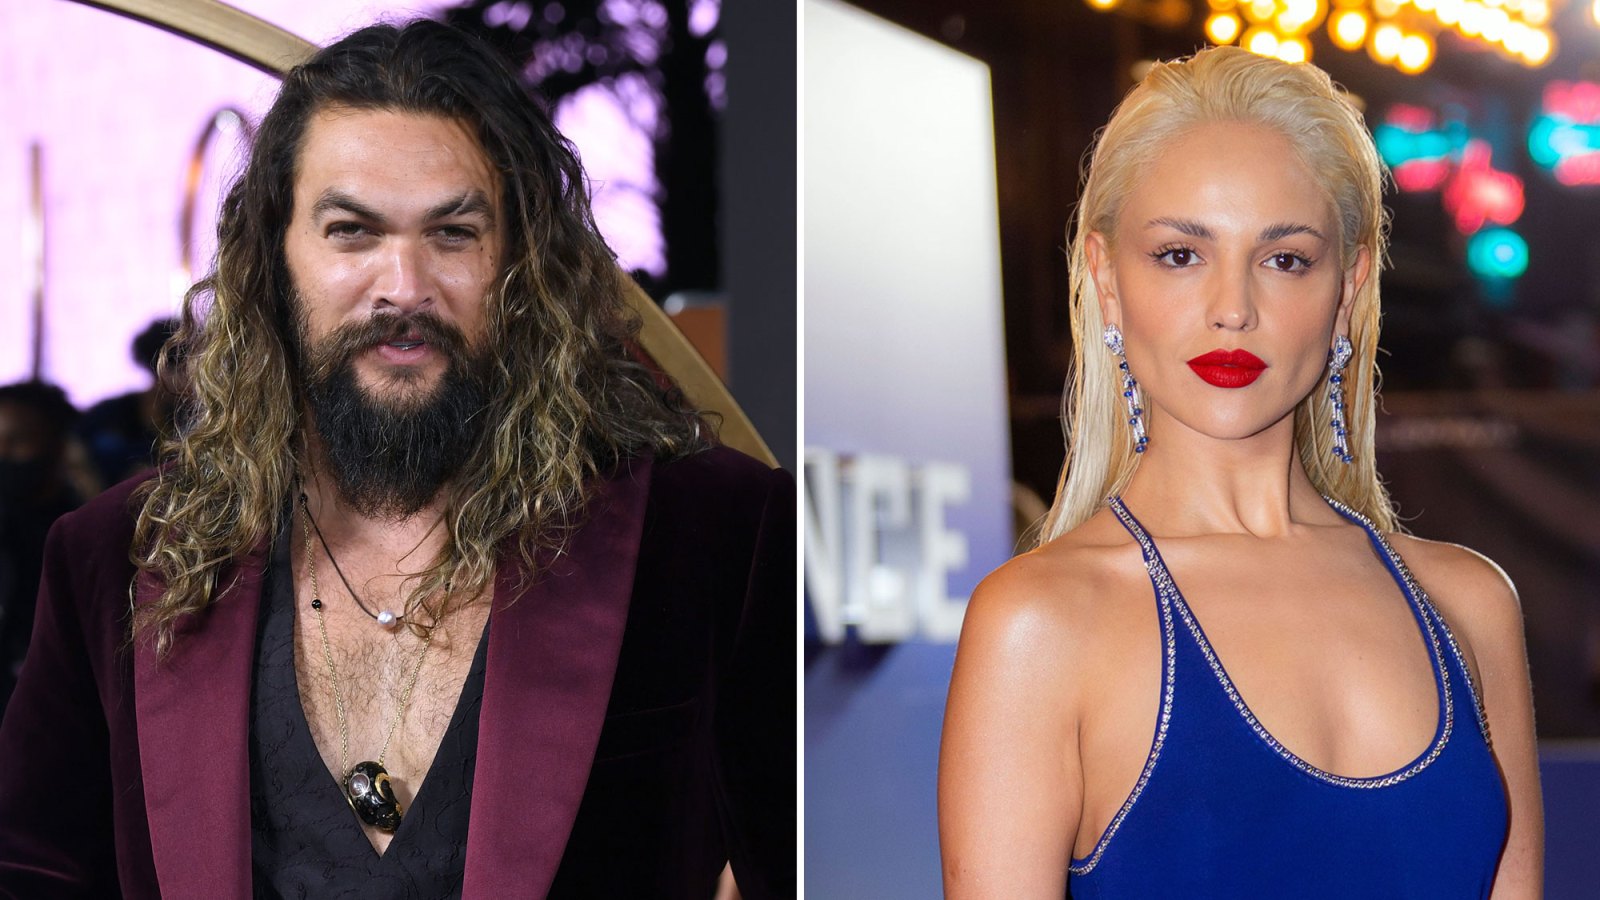 Jason Momoa Takes Romantic Motorcycle Ride With Eiza Gonzalez After Head-On Crash, Sparks Reconciliation Rumors